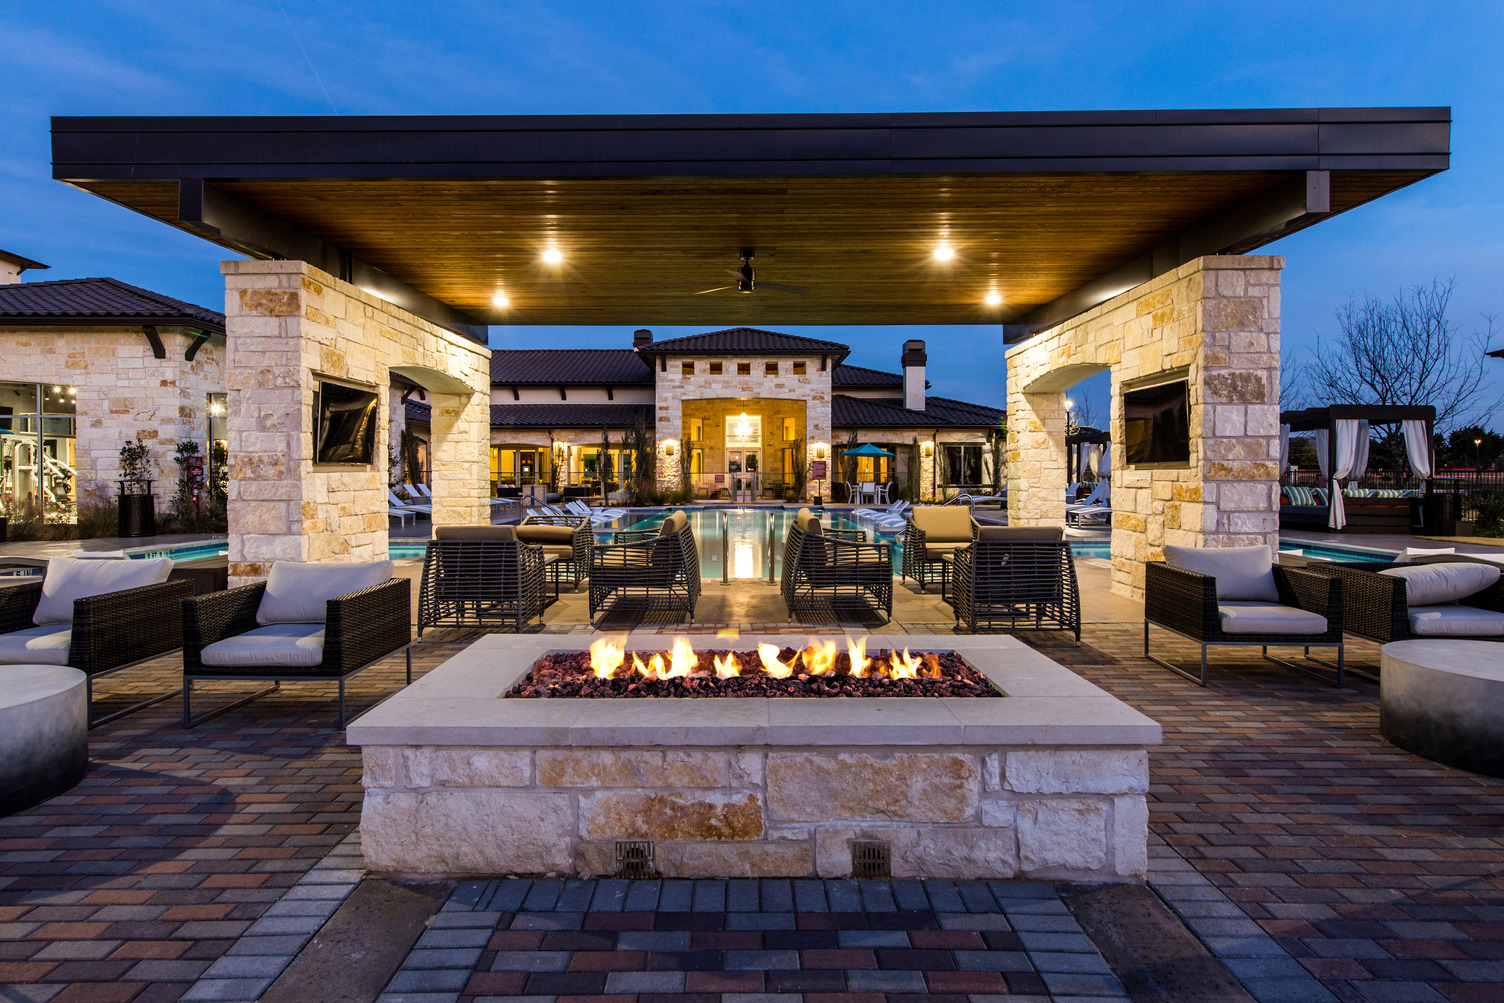 View of pool courtyard at dusk with fire pit